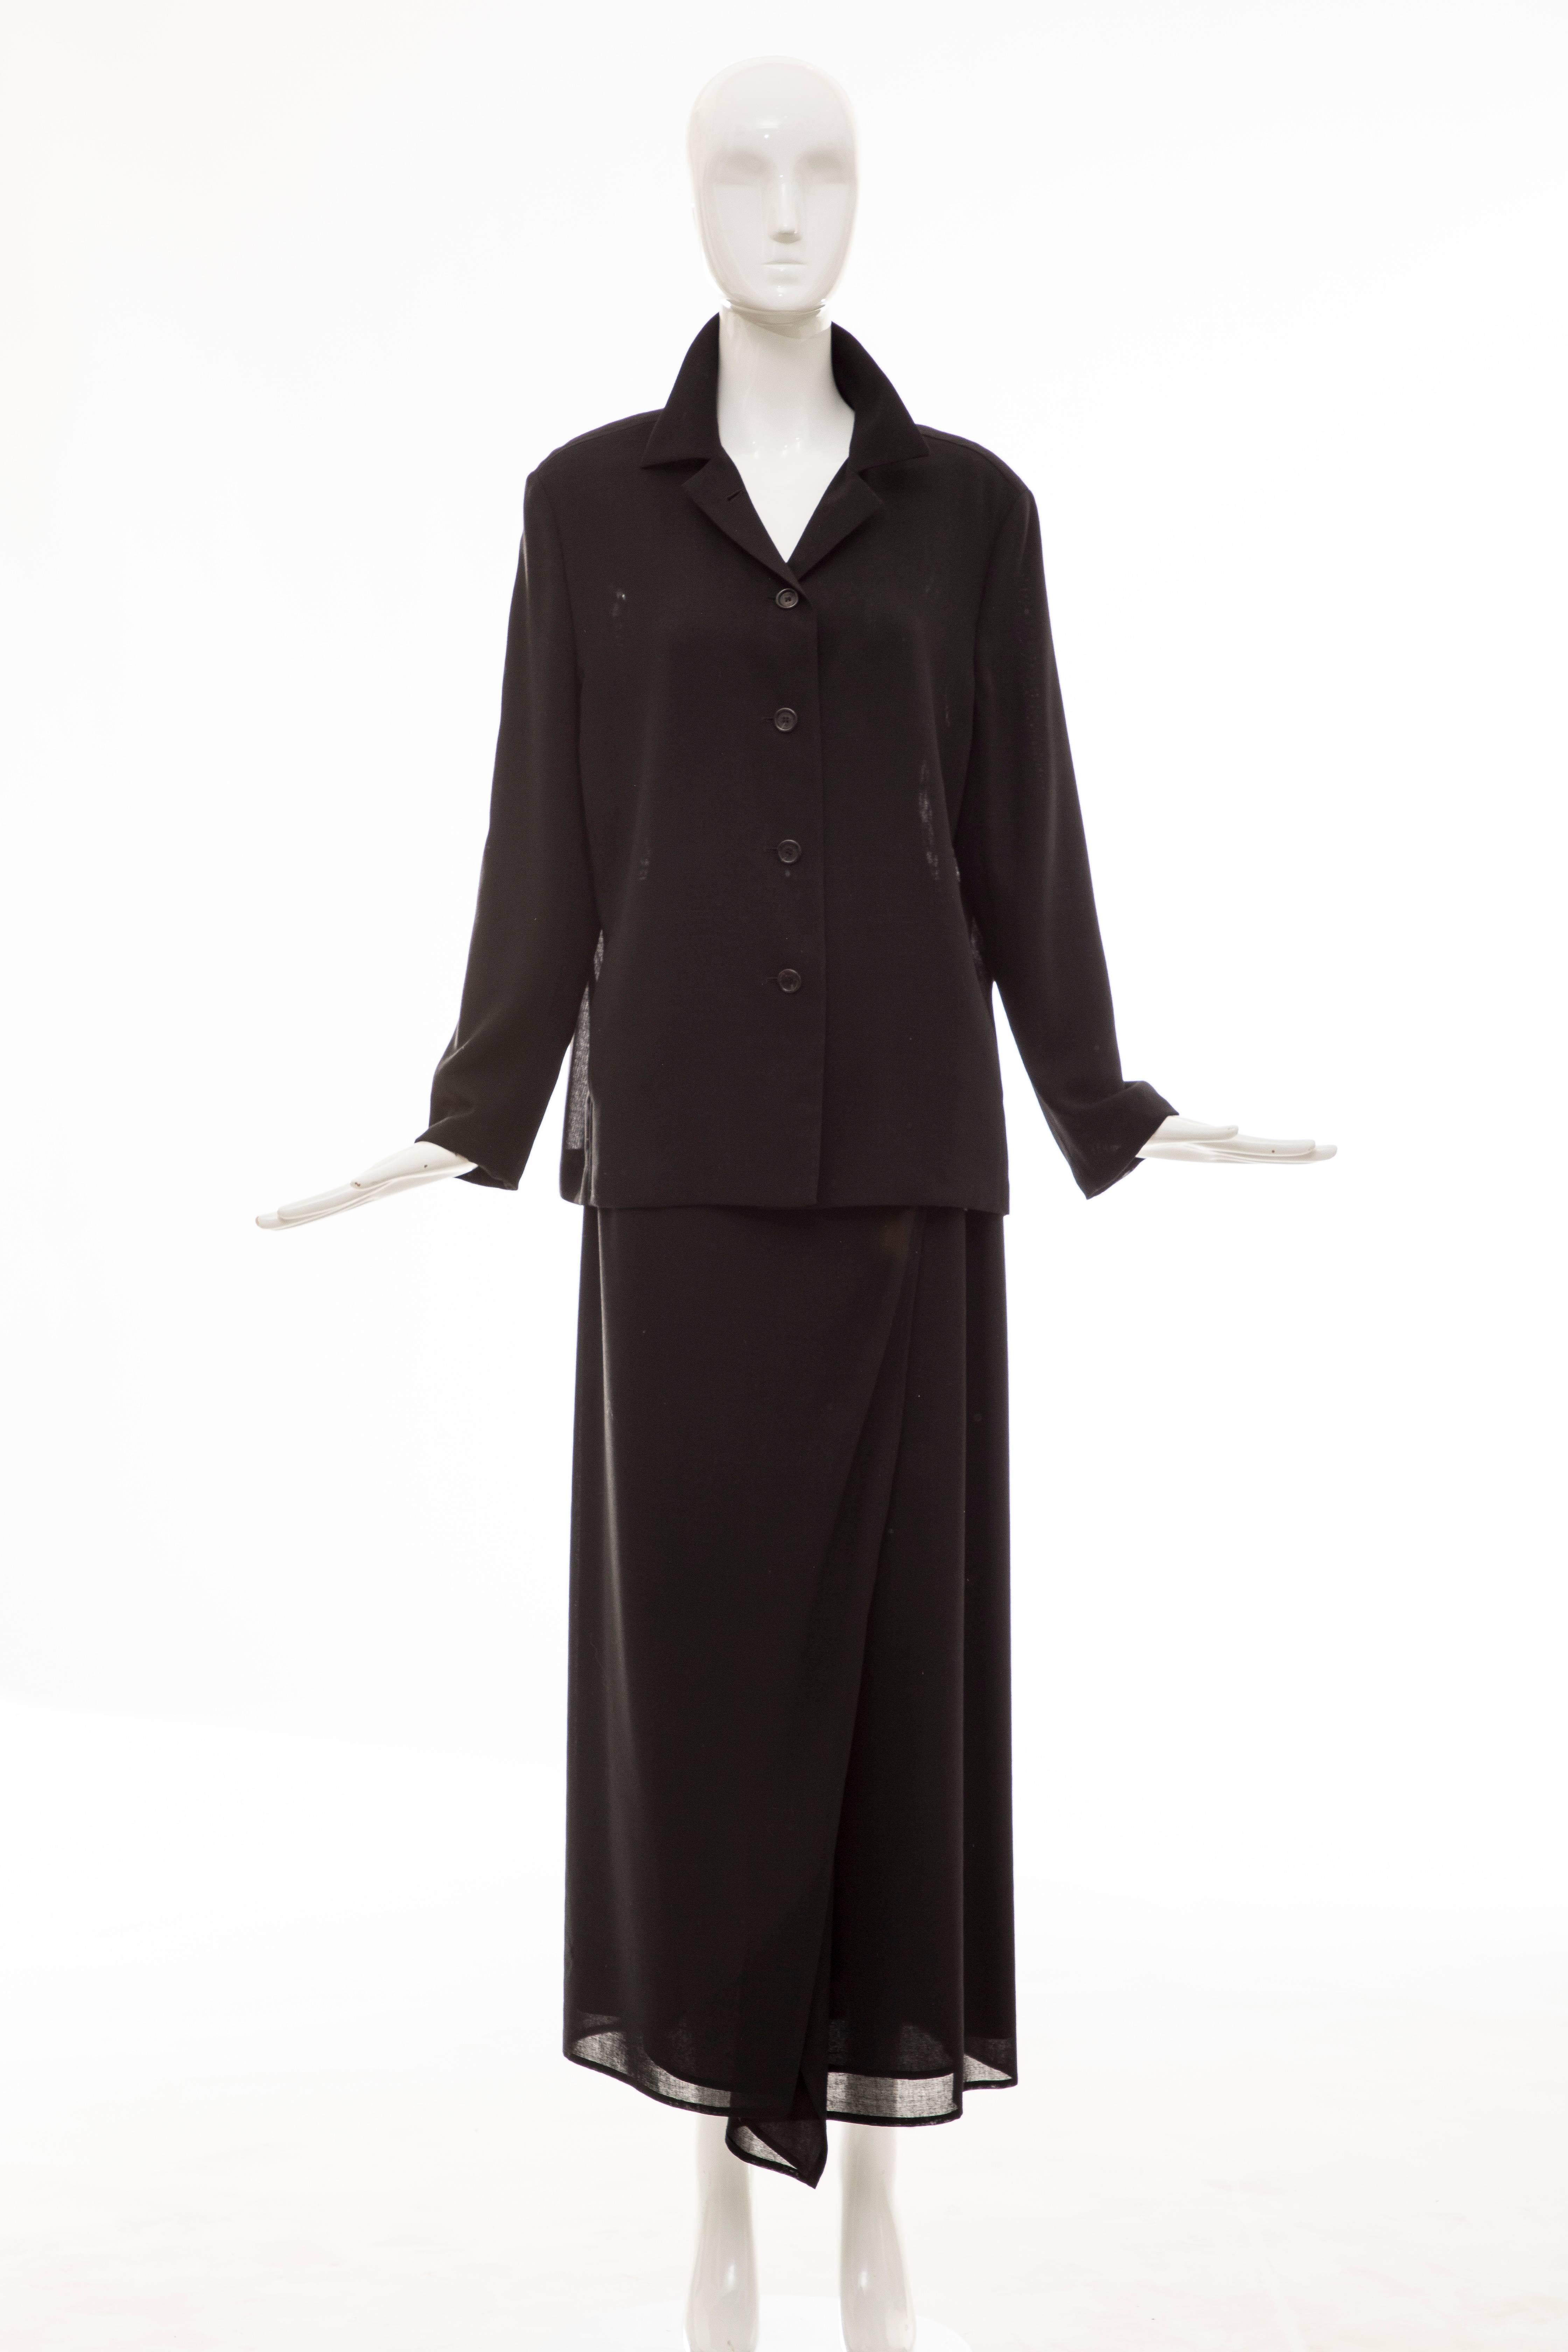 Cerruti 1881, Circa 1990's black lightweight wool gauze skirt-suit. Jacket has button front with two front pockets and skirt has hook-and-eye and snap closure and fully lined in silk.

US. 10

Jacket: Bust 43, Waist 43, Shoulders 17, Hips 44, Length